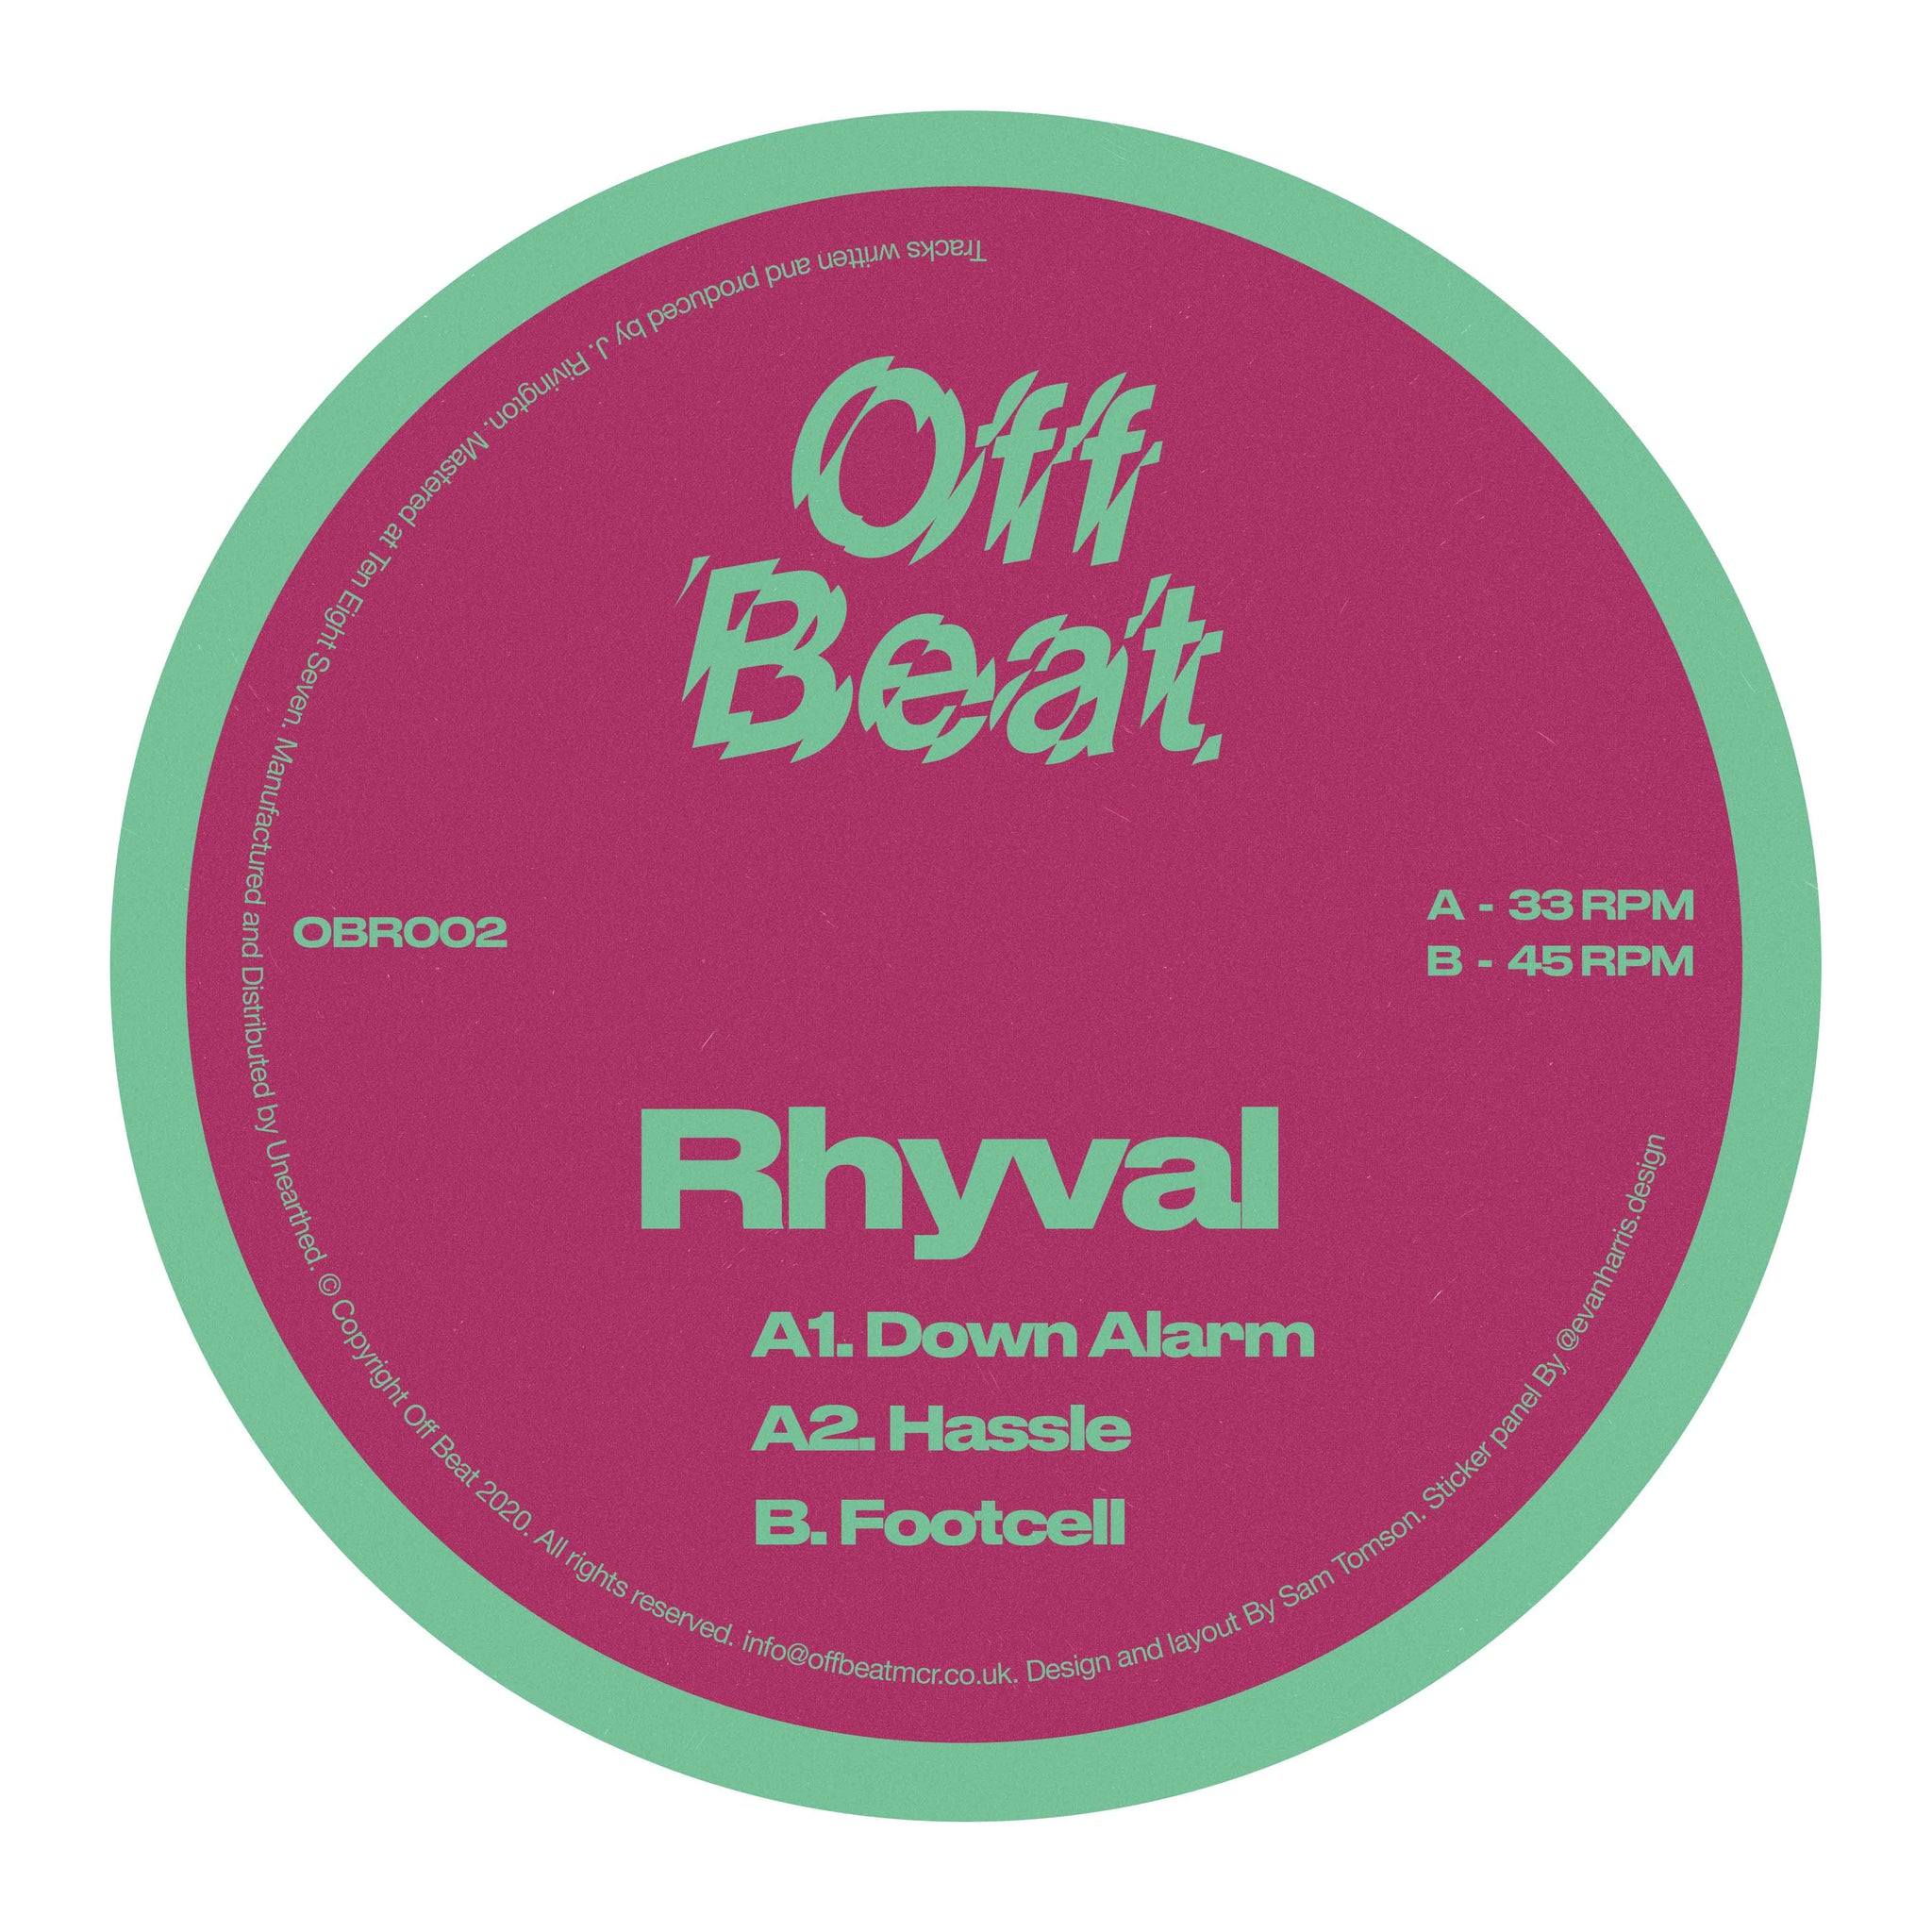 RHYVAL 'FOOTCELL' 12" [SALE]